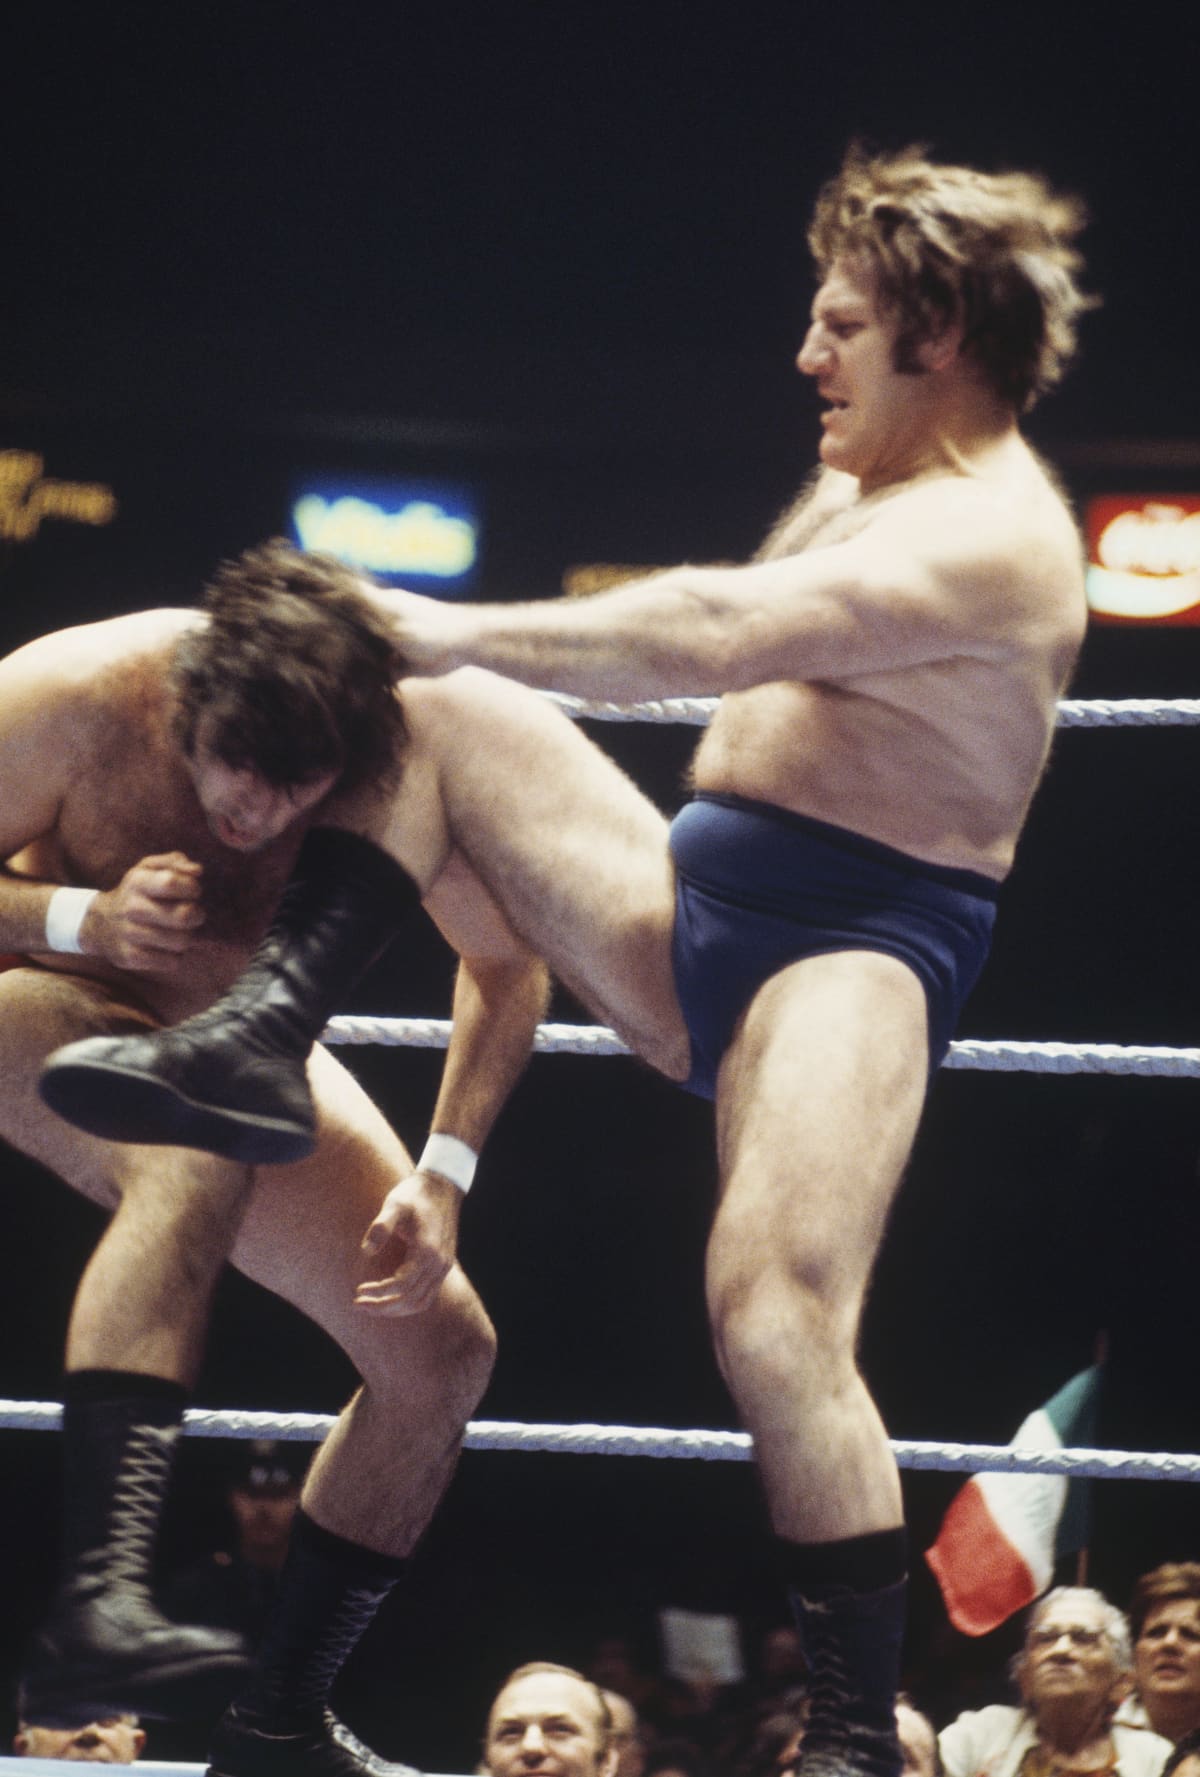 10/21/1968-New York City-ORIGINAL CAPTION READS:  Big Bruno Sammartino was beaten by this relatively gentle-looking soul, the Shiek, from Syria, billed as the Arabian champion.  Sammartino was disqualified after 12 minutes and 16 seconds before a crowd of 10,443 in the feature heavyweight wrestling exhibition at Madison Square Garden.